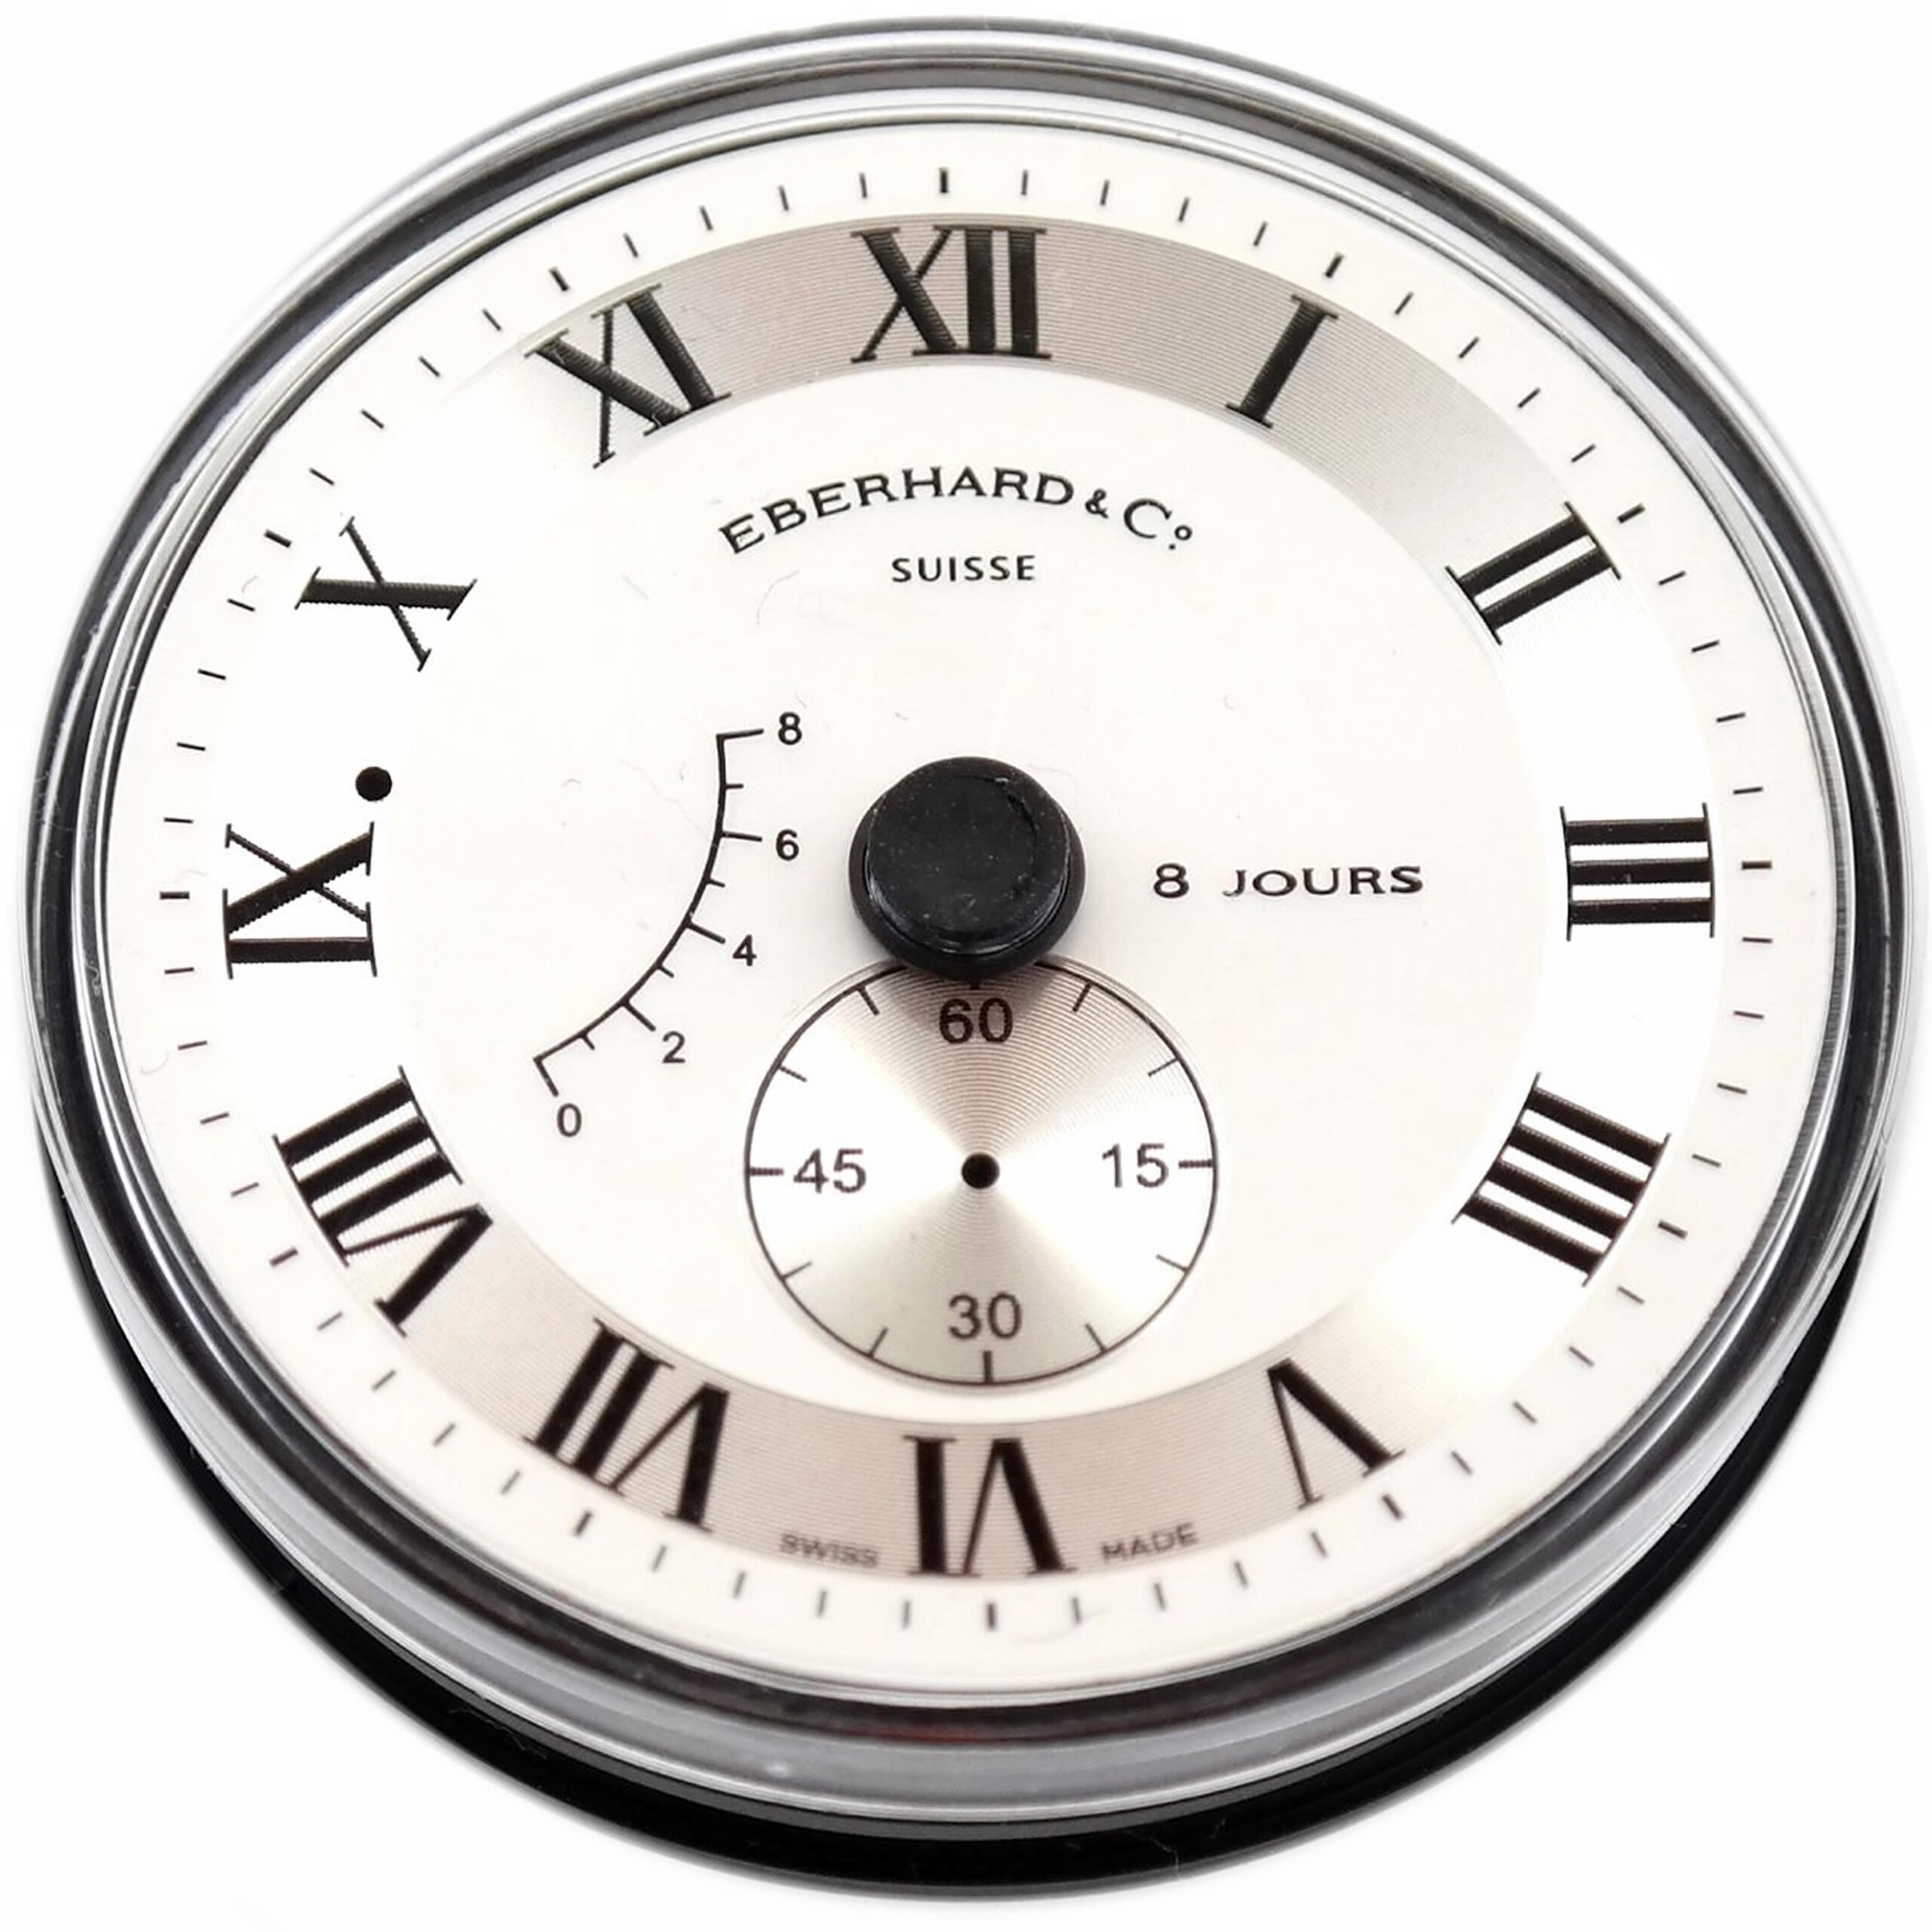 Eberhard & Co. - 8 JOURS GRANDE TAILLE - Watch Dial